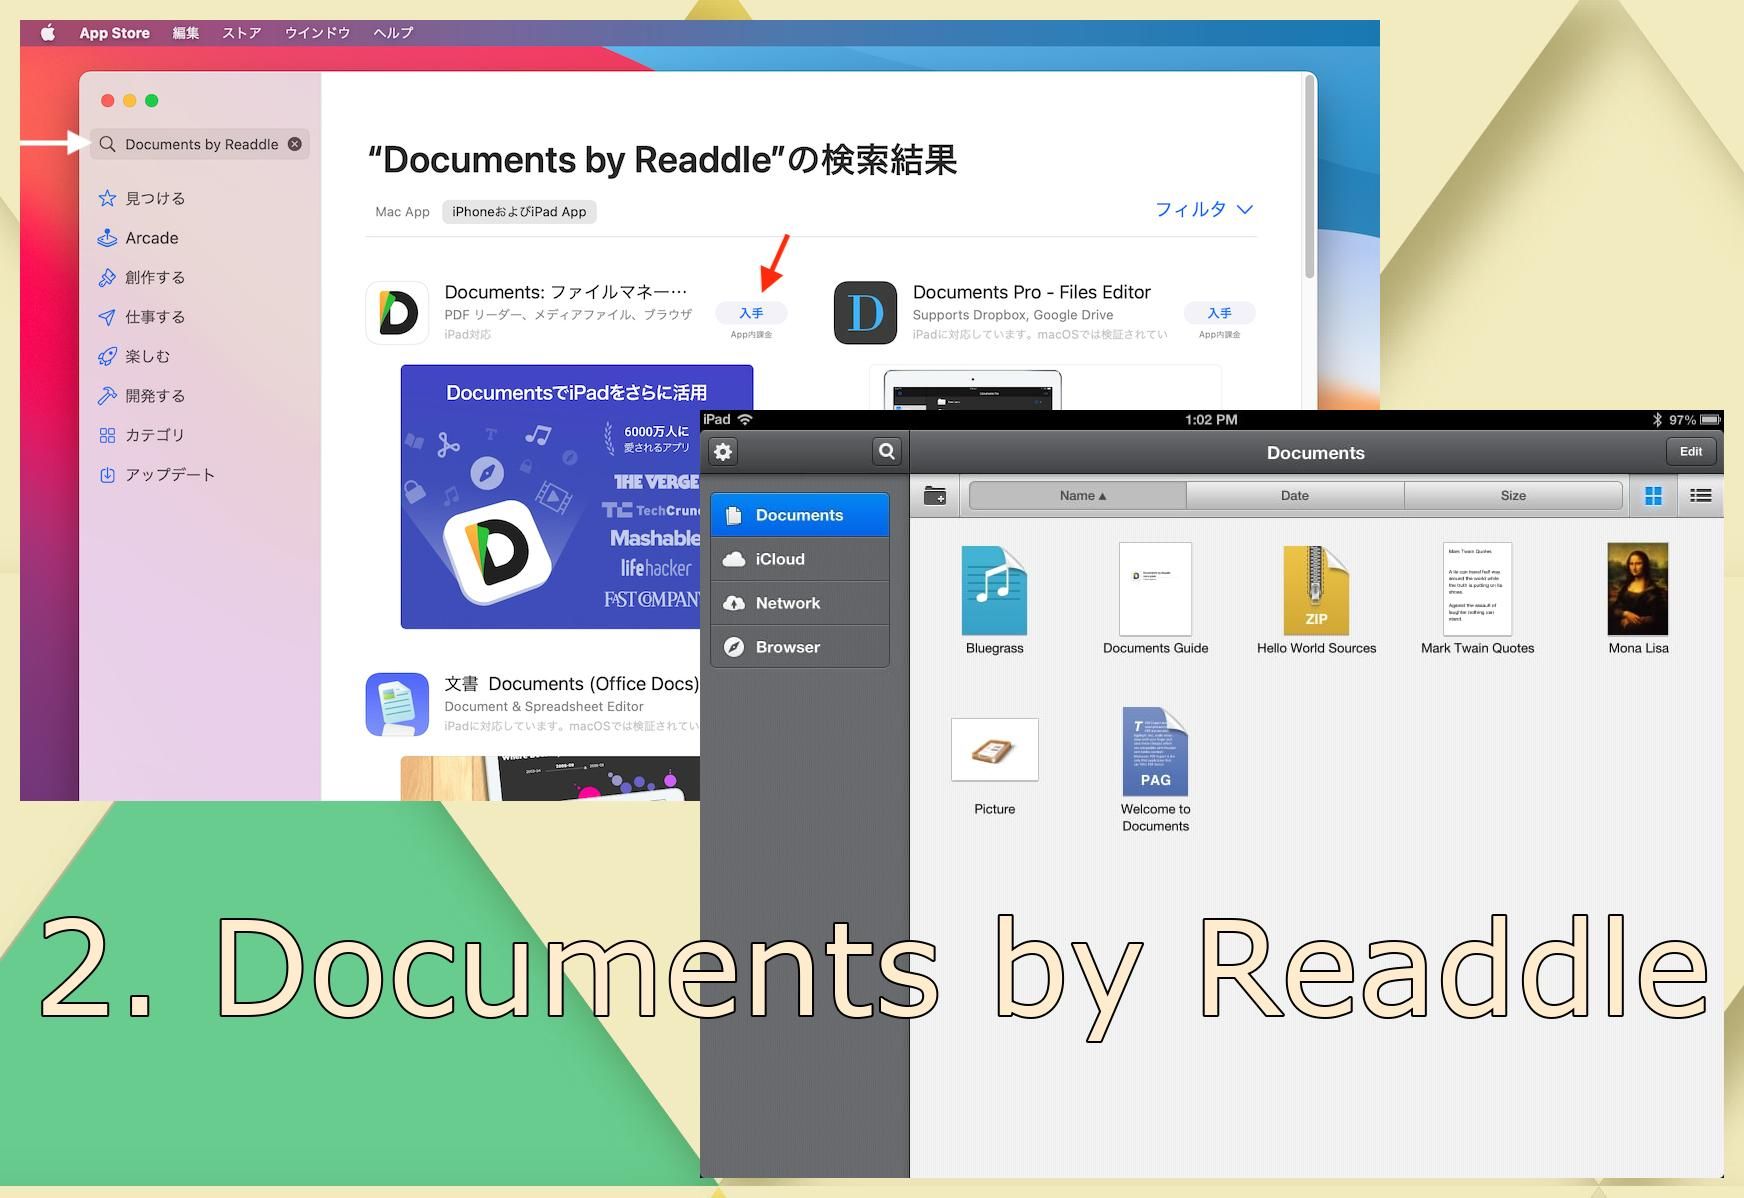 2. Documents by Readdle..